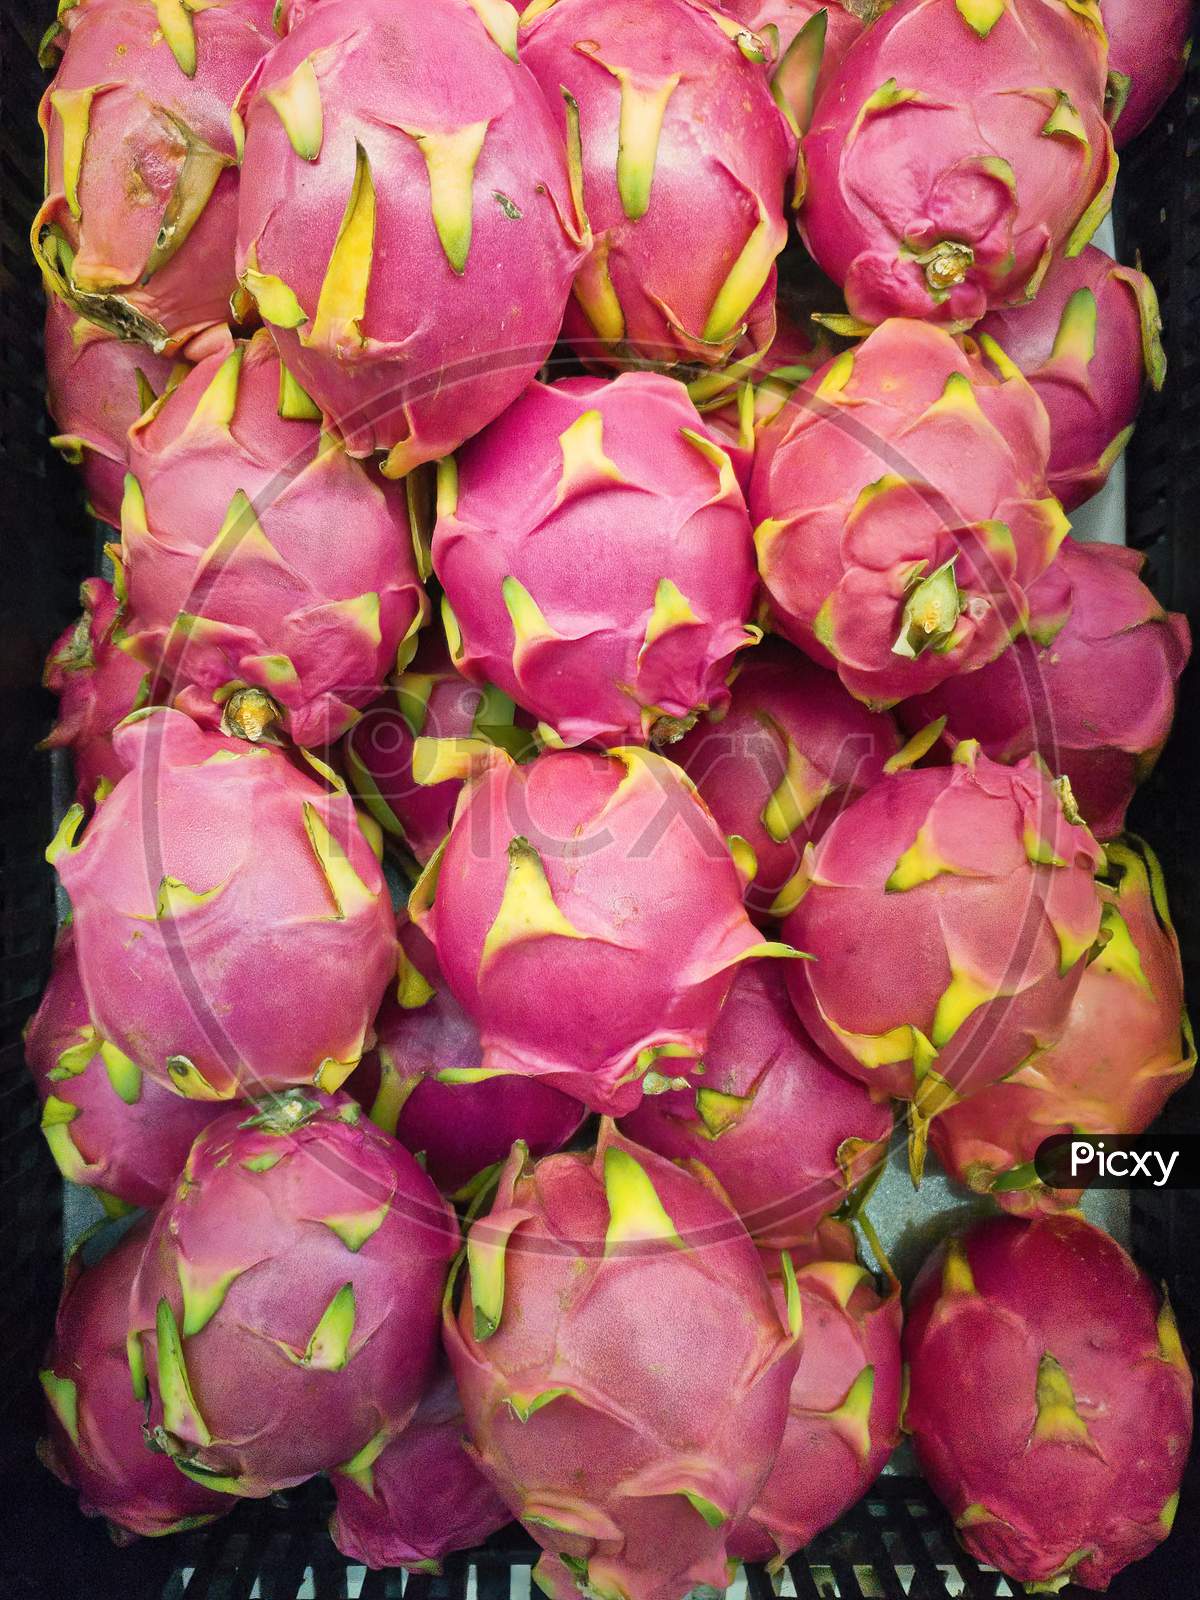 Dragon Fruits For Sale In Market